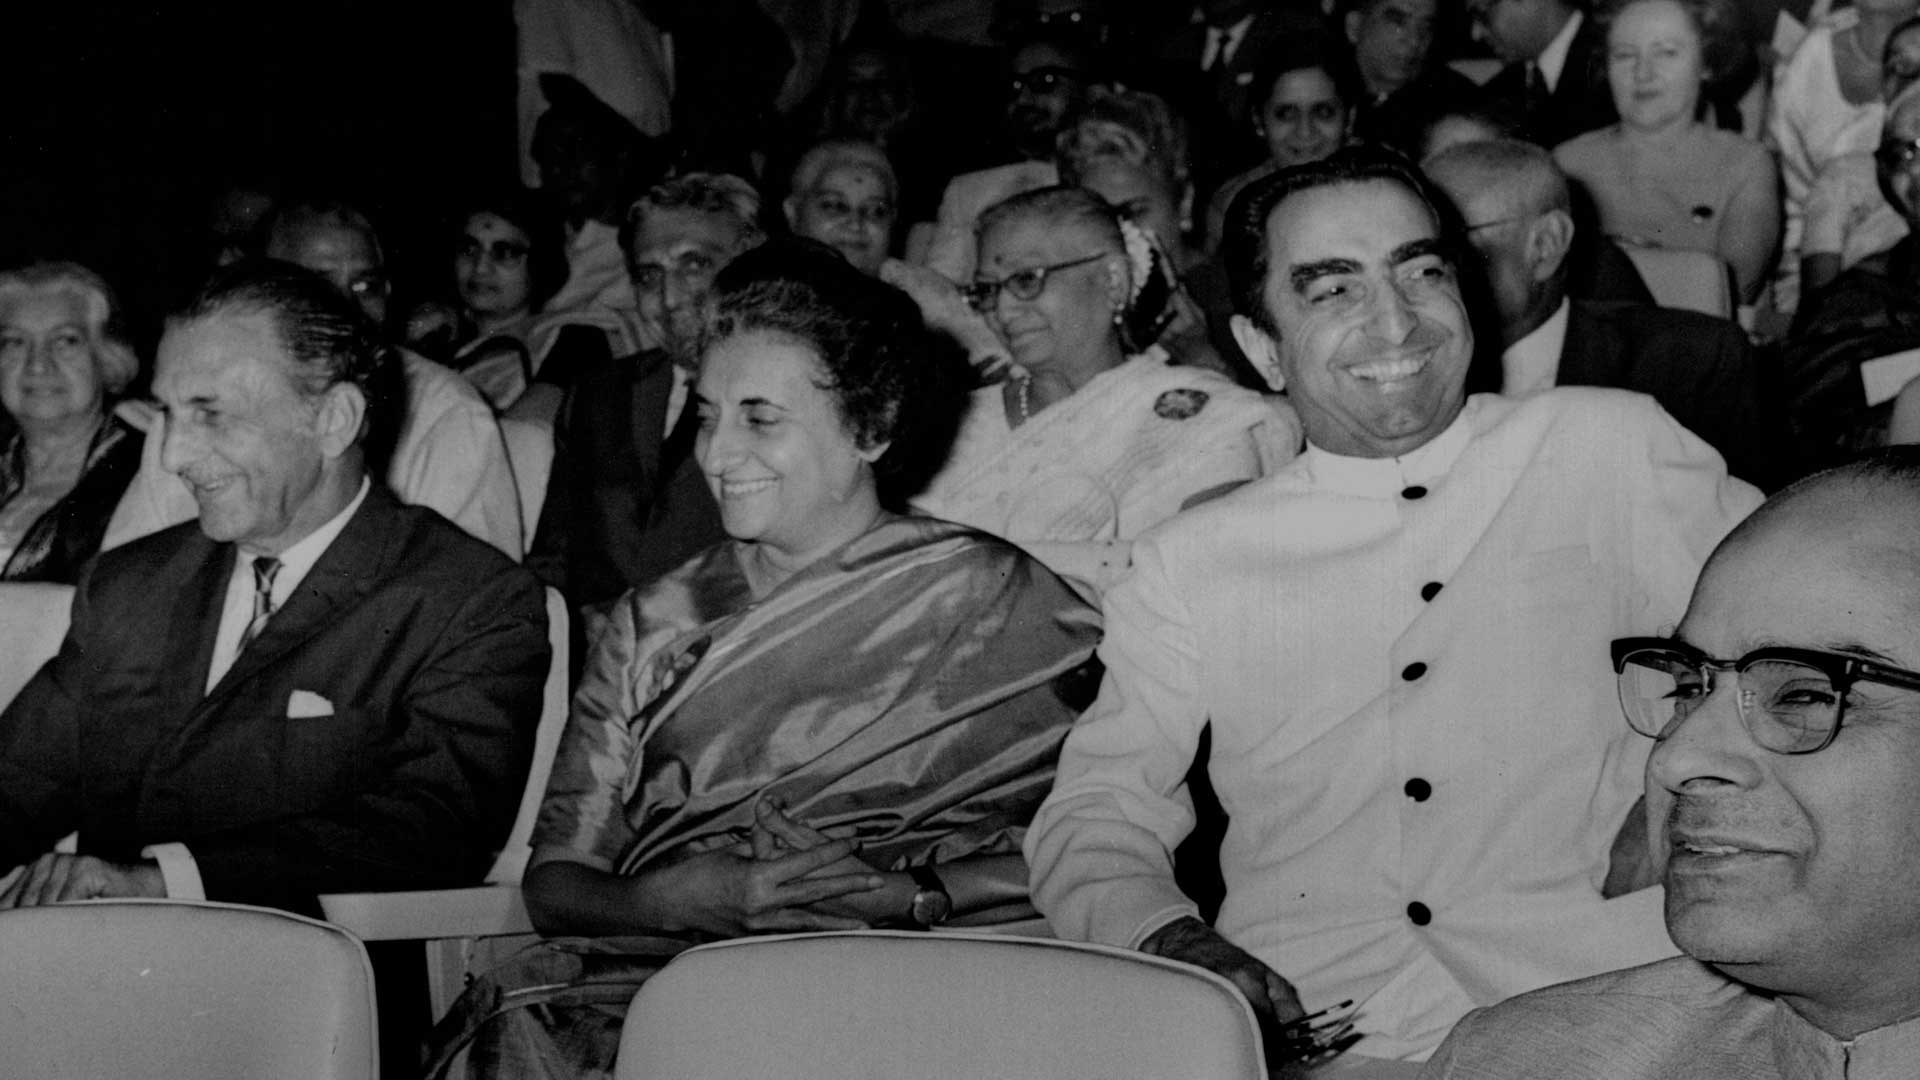 JRD Tata, then Prime Minister Indira Gandhi and Dr Jamshed Bhabha and the inauguration of the NCPA